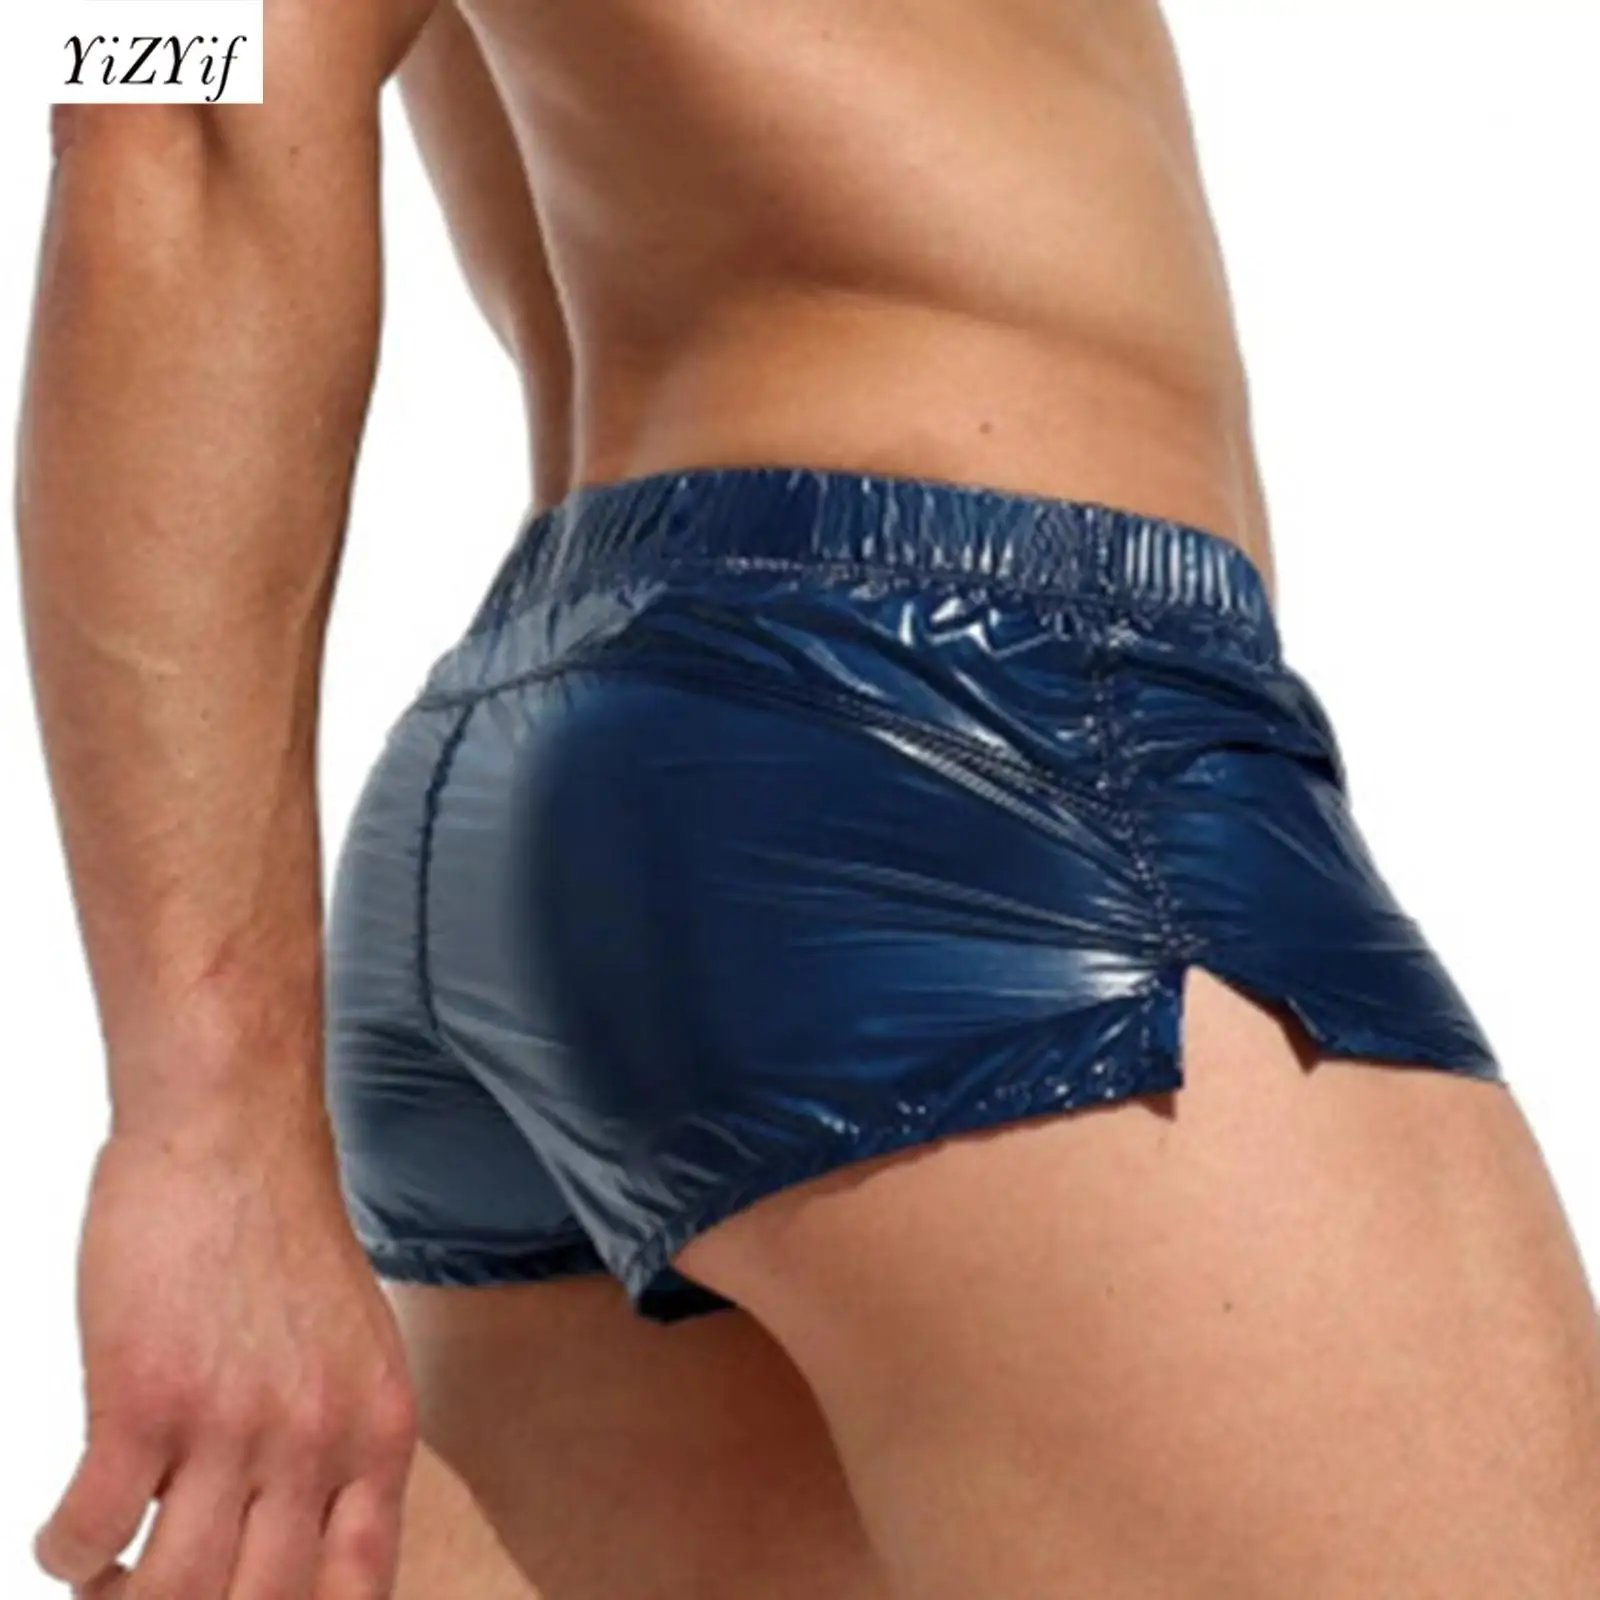 Mens Glossy Shorts Solid Color Low Rise Sides Slit Slim Fit Trunks Underpants Beach Pool Night Club Party Shorts Boxer Clubwear sexy vintage black sequin short jeans women summer fashion jean hot pants y2k streetwear low rise jeans club party denim shorts